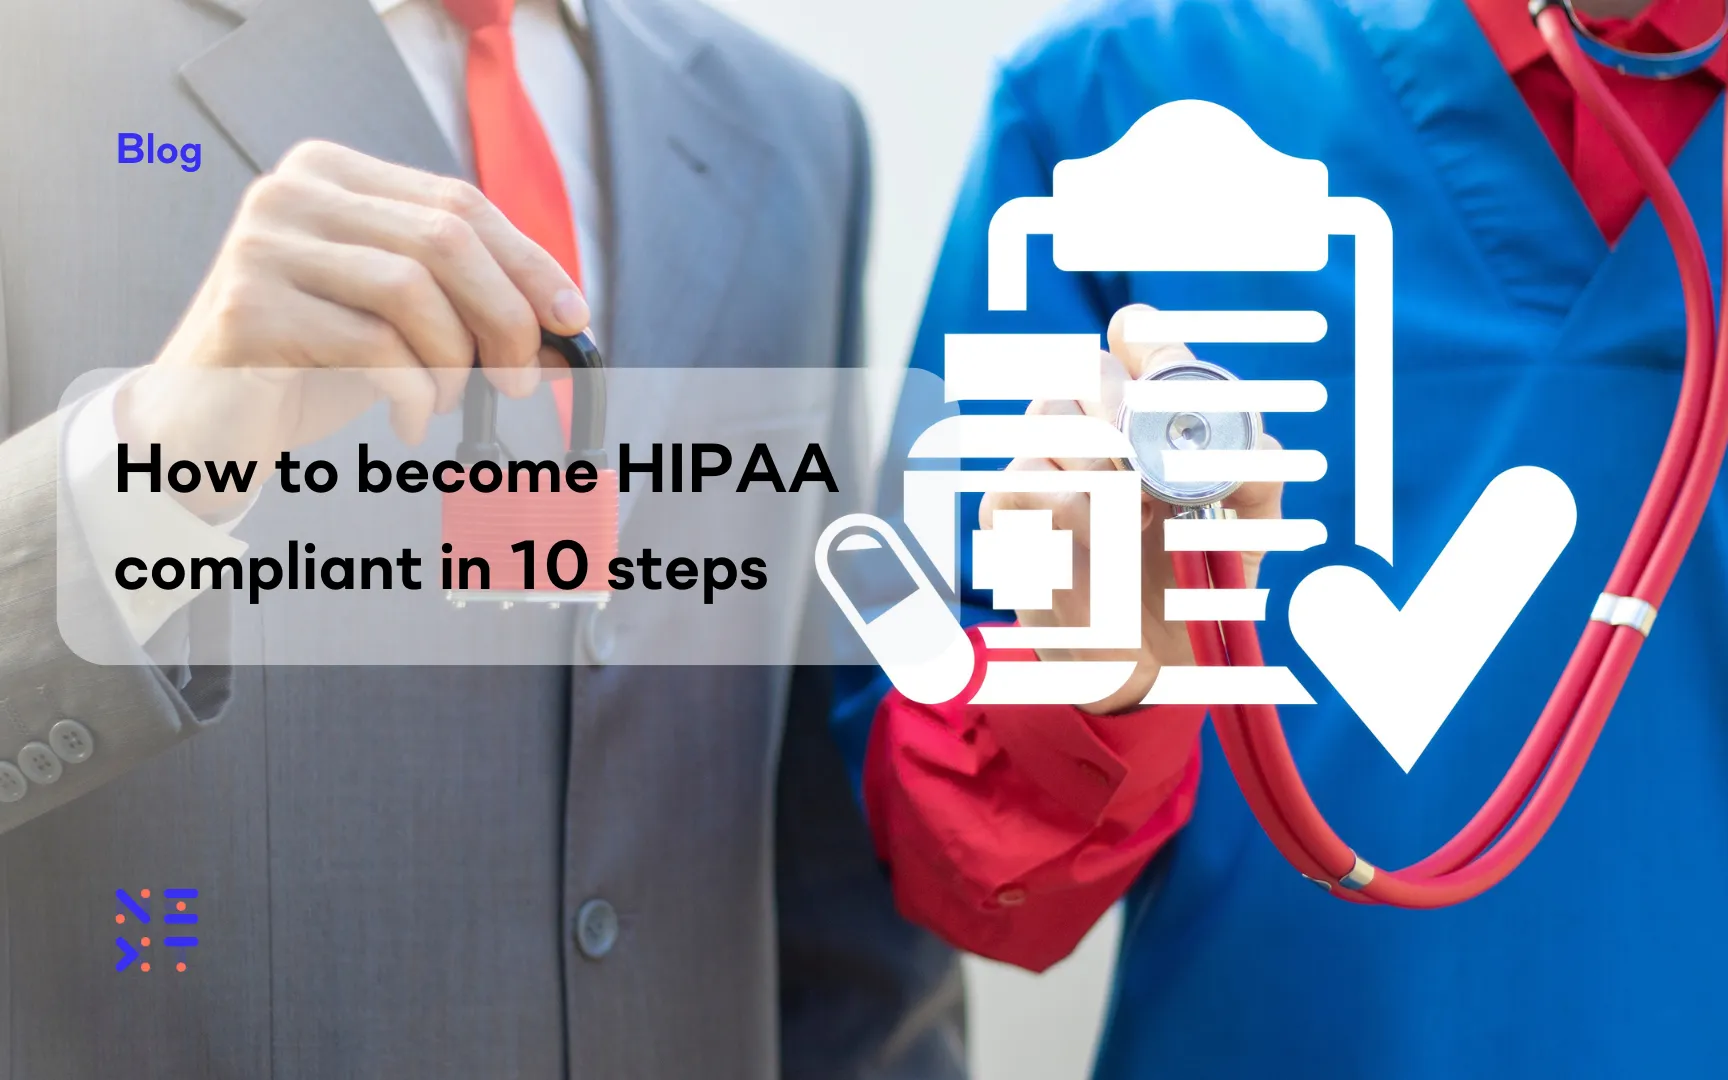 How to become HIPAA compliant in 10 steps